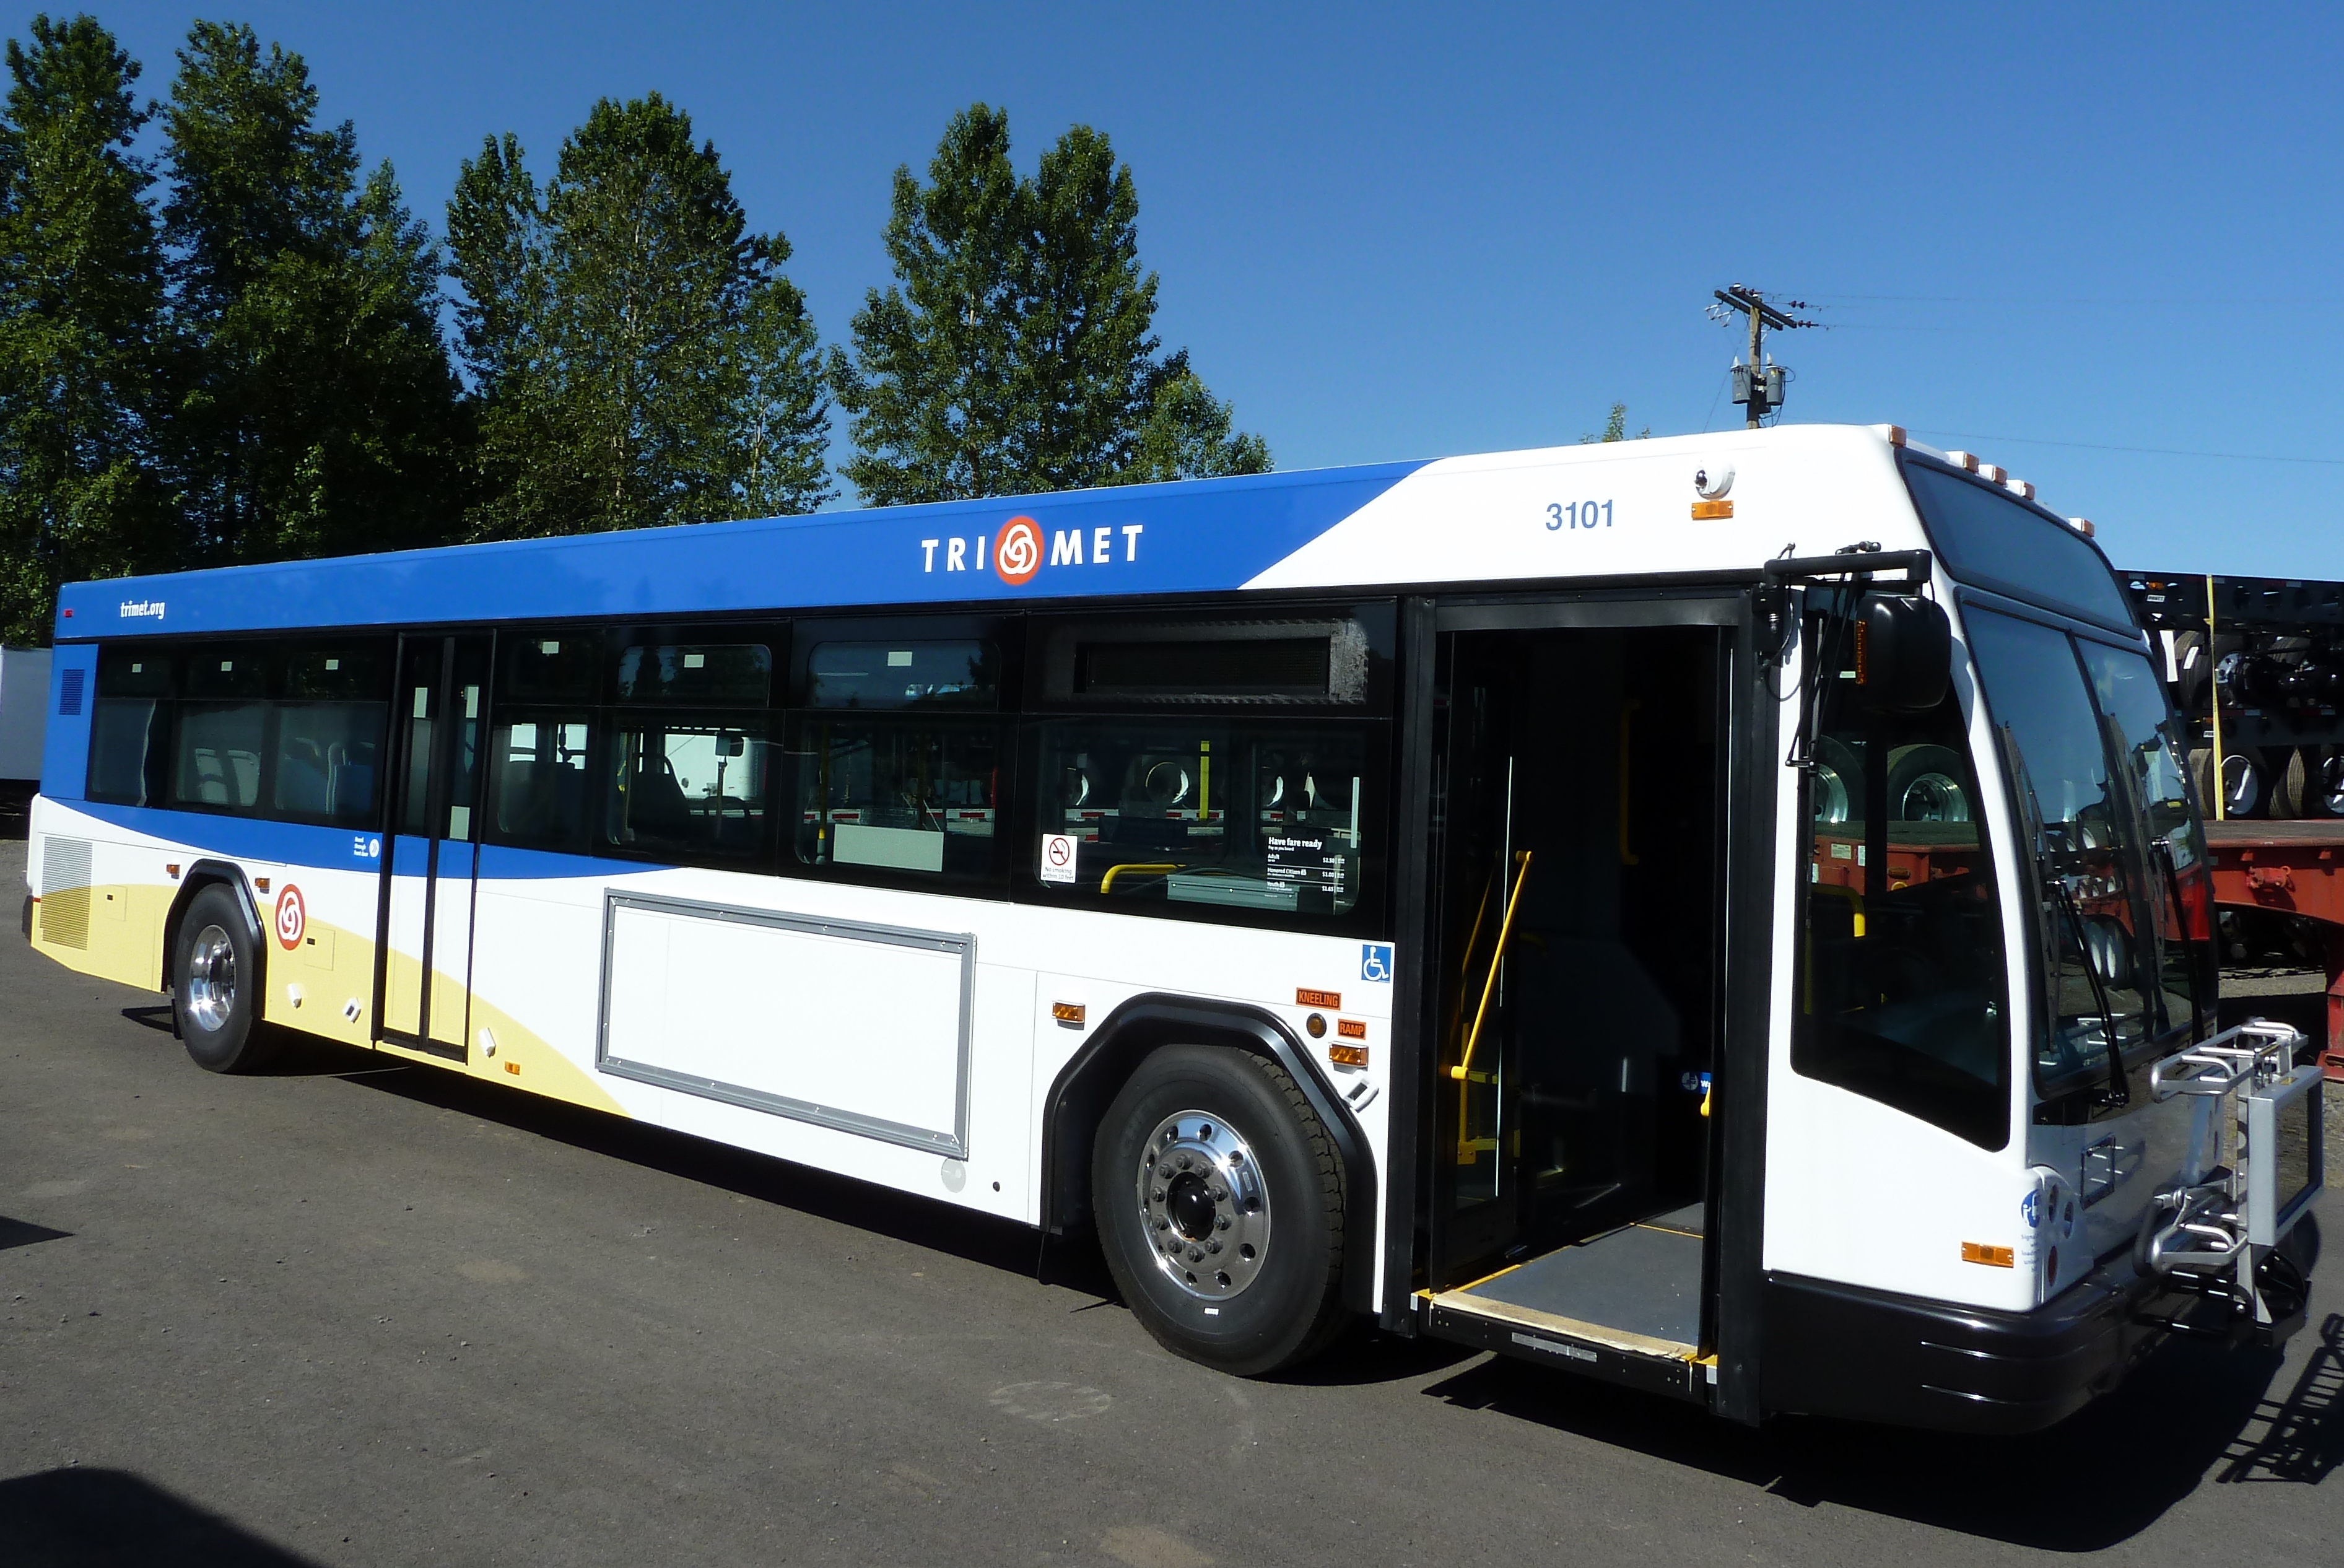 new-trimet-buses-to-begin-service-in-less-than-a-month-trimet-news